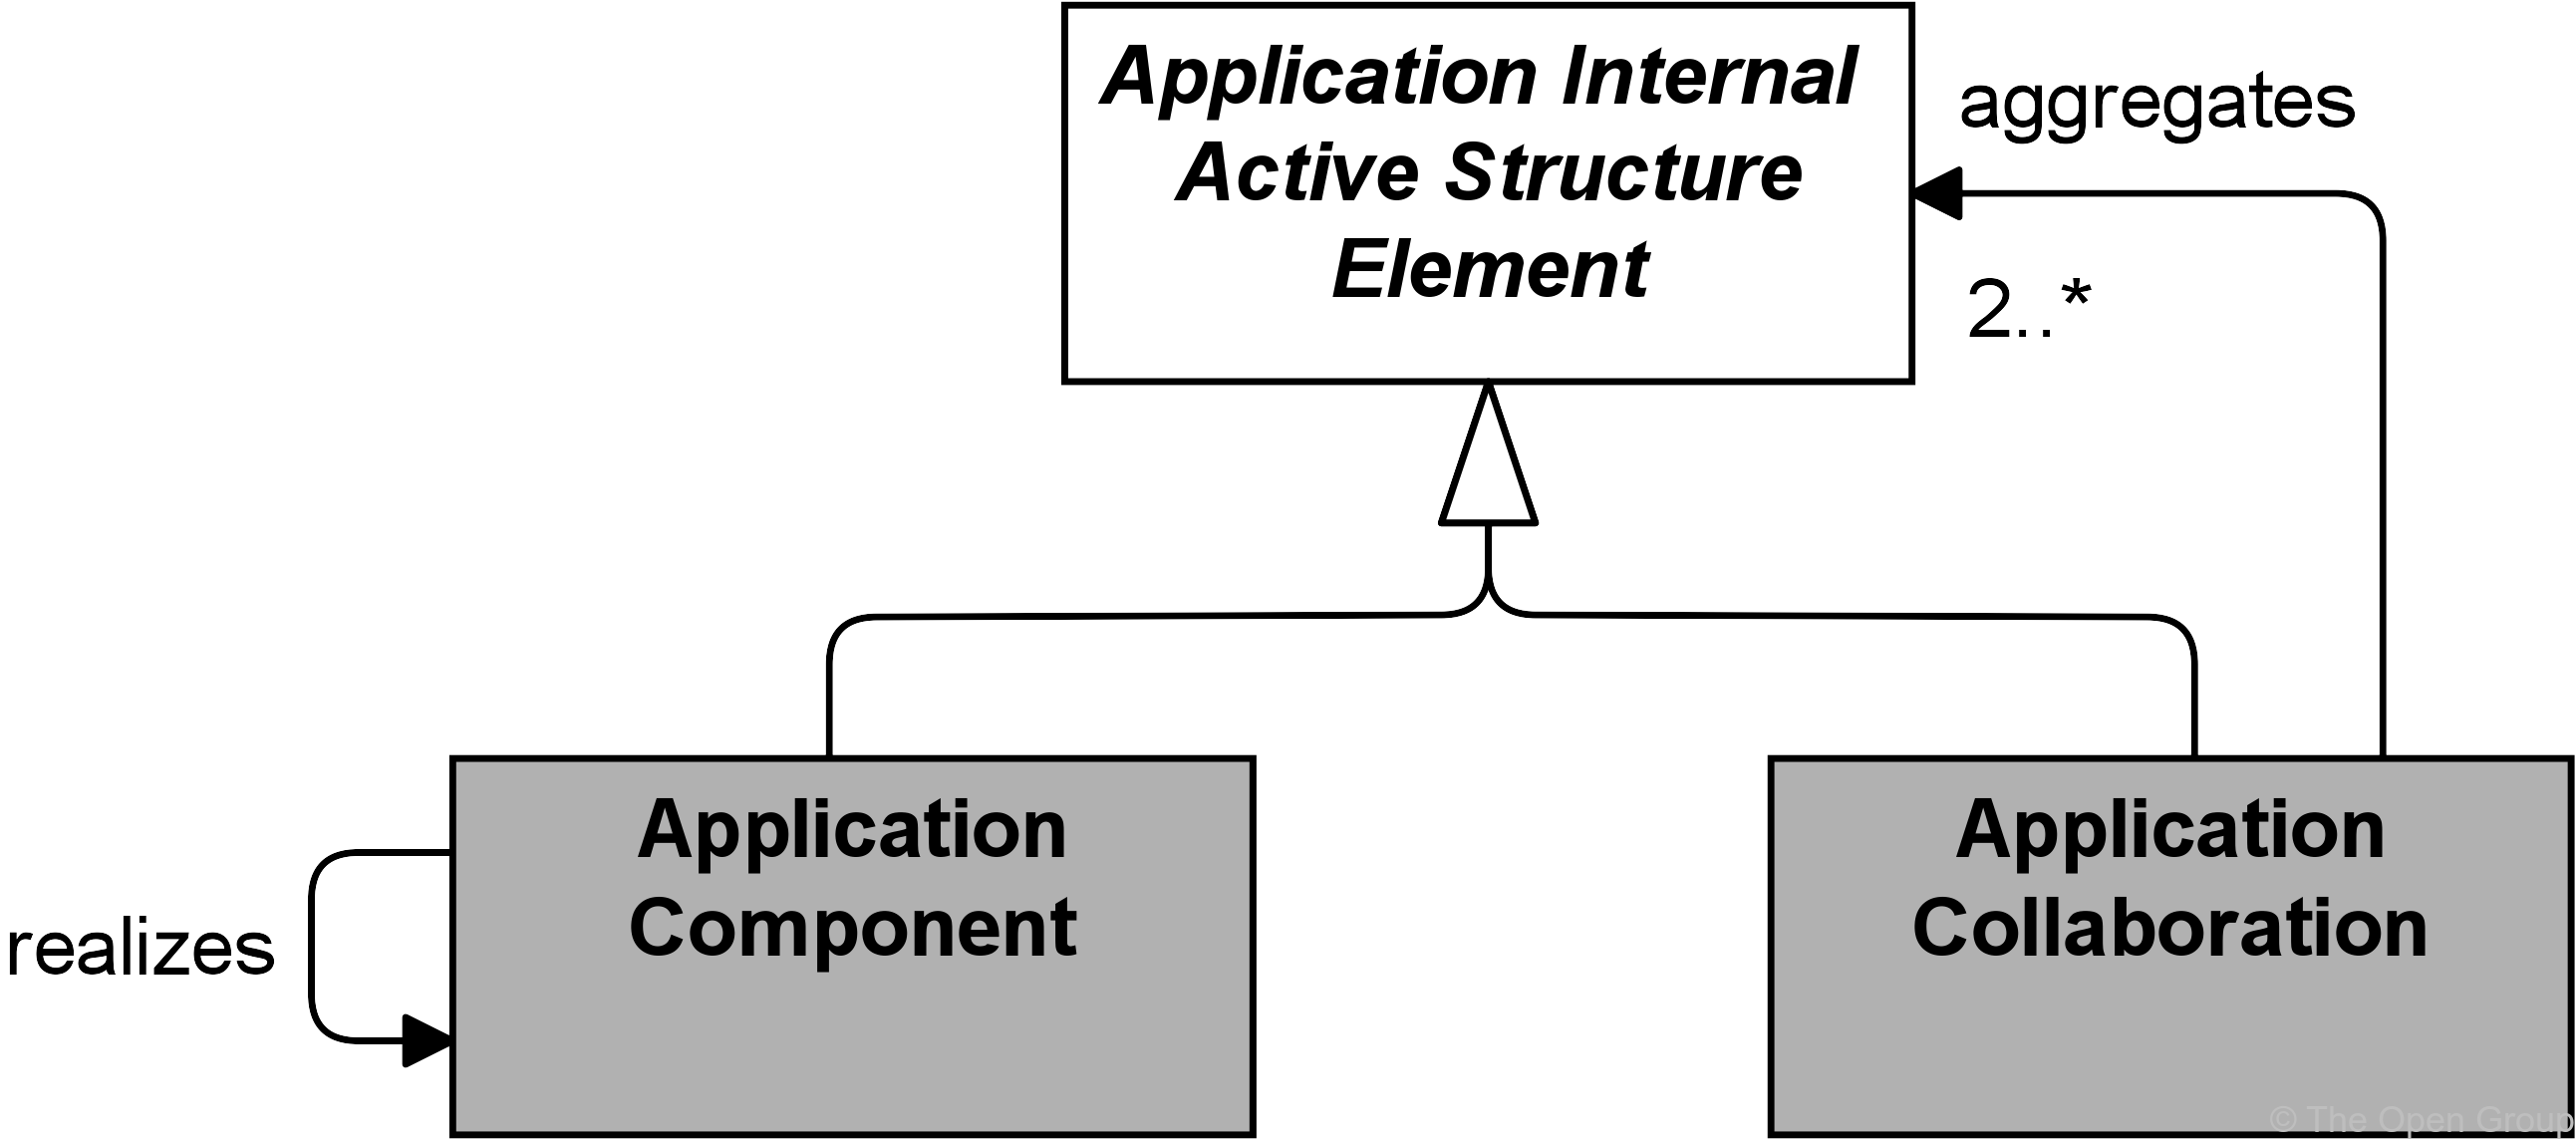 fig Application Internal Active Structure Elements